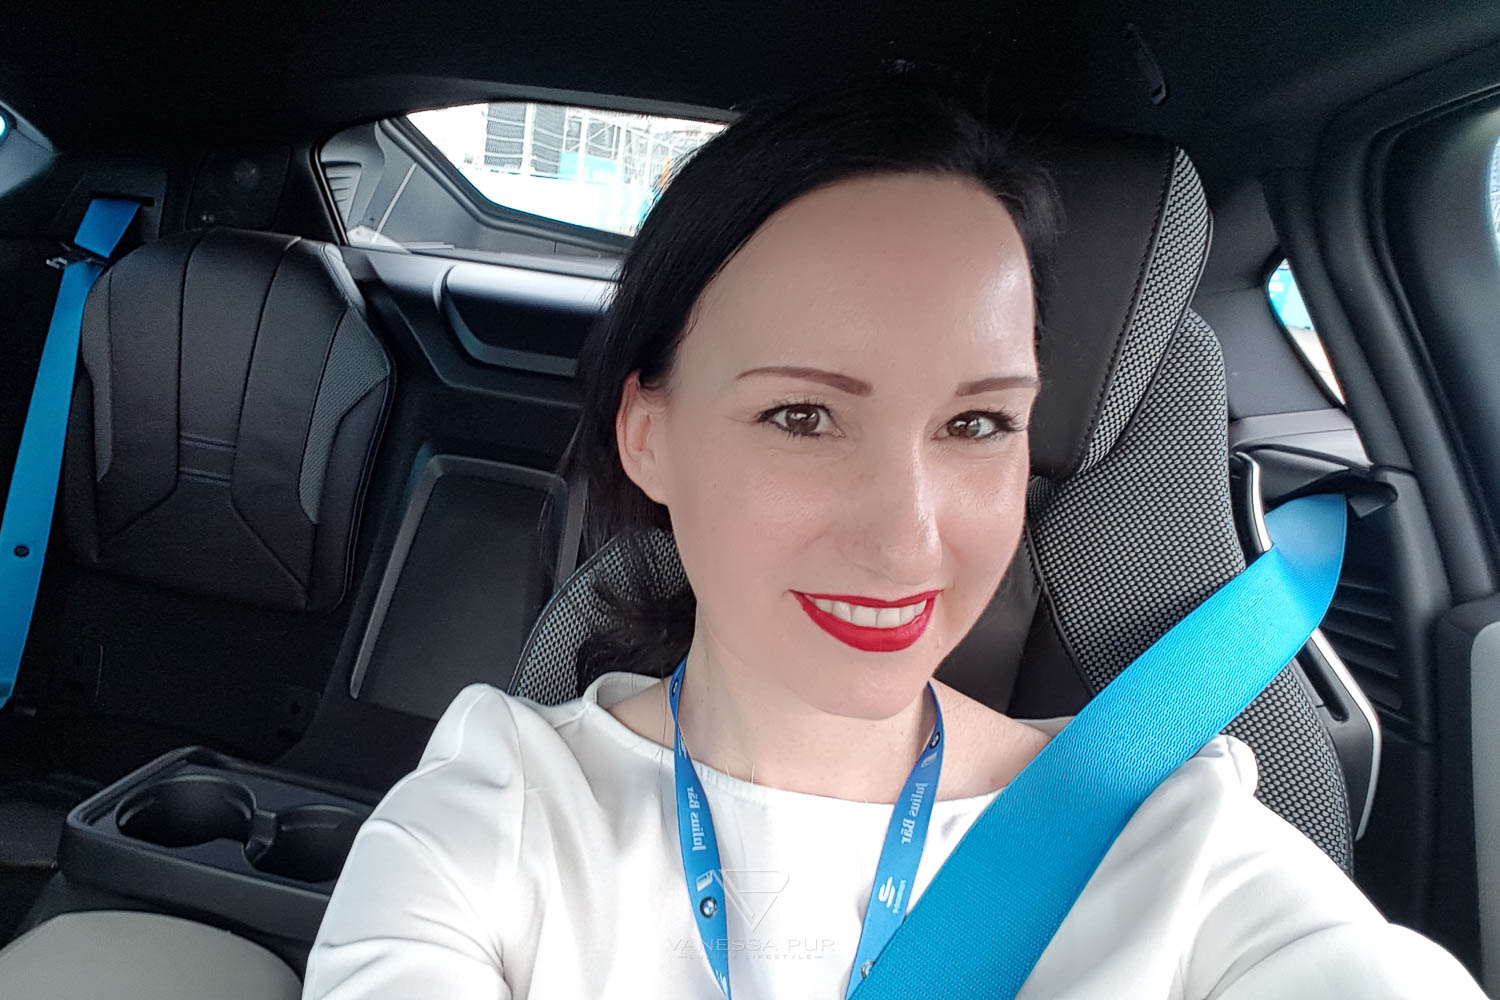 Vanessa Pur BMW i8 driving experience on the Formula E race track in Berlin - Race Track & Driving Experience - HarmanKardon GetElectrified Formula E Grand Prix Berlin - BMW Motorsport Event and Driving Experience with BMW i8 ECar